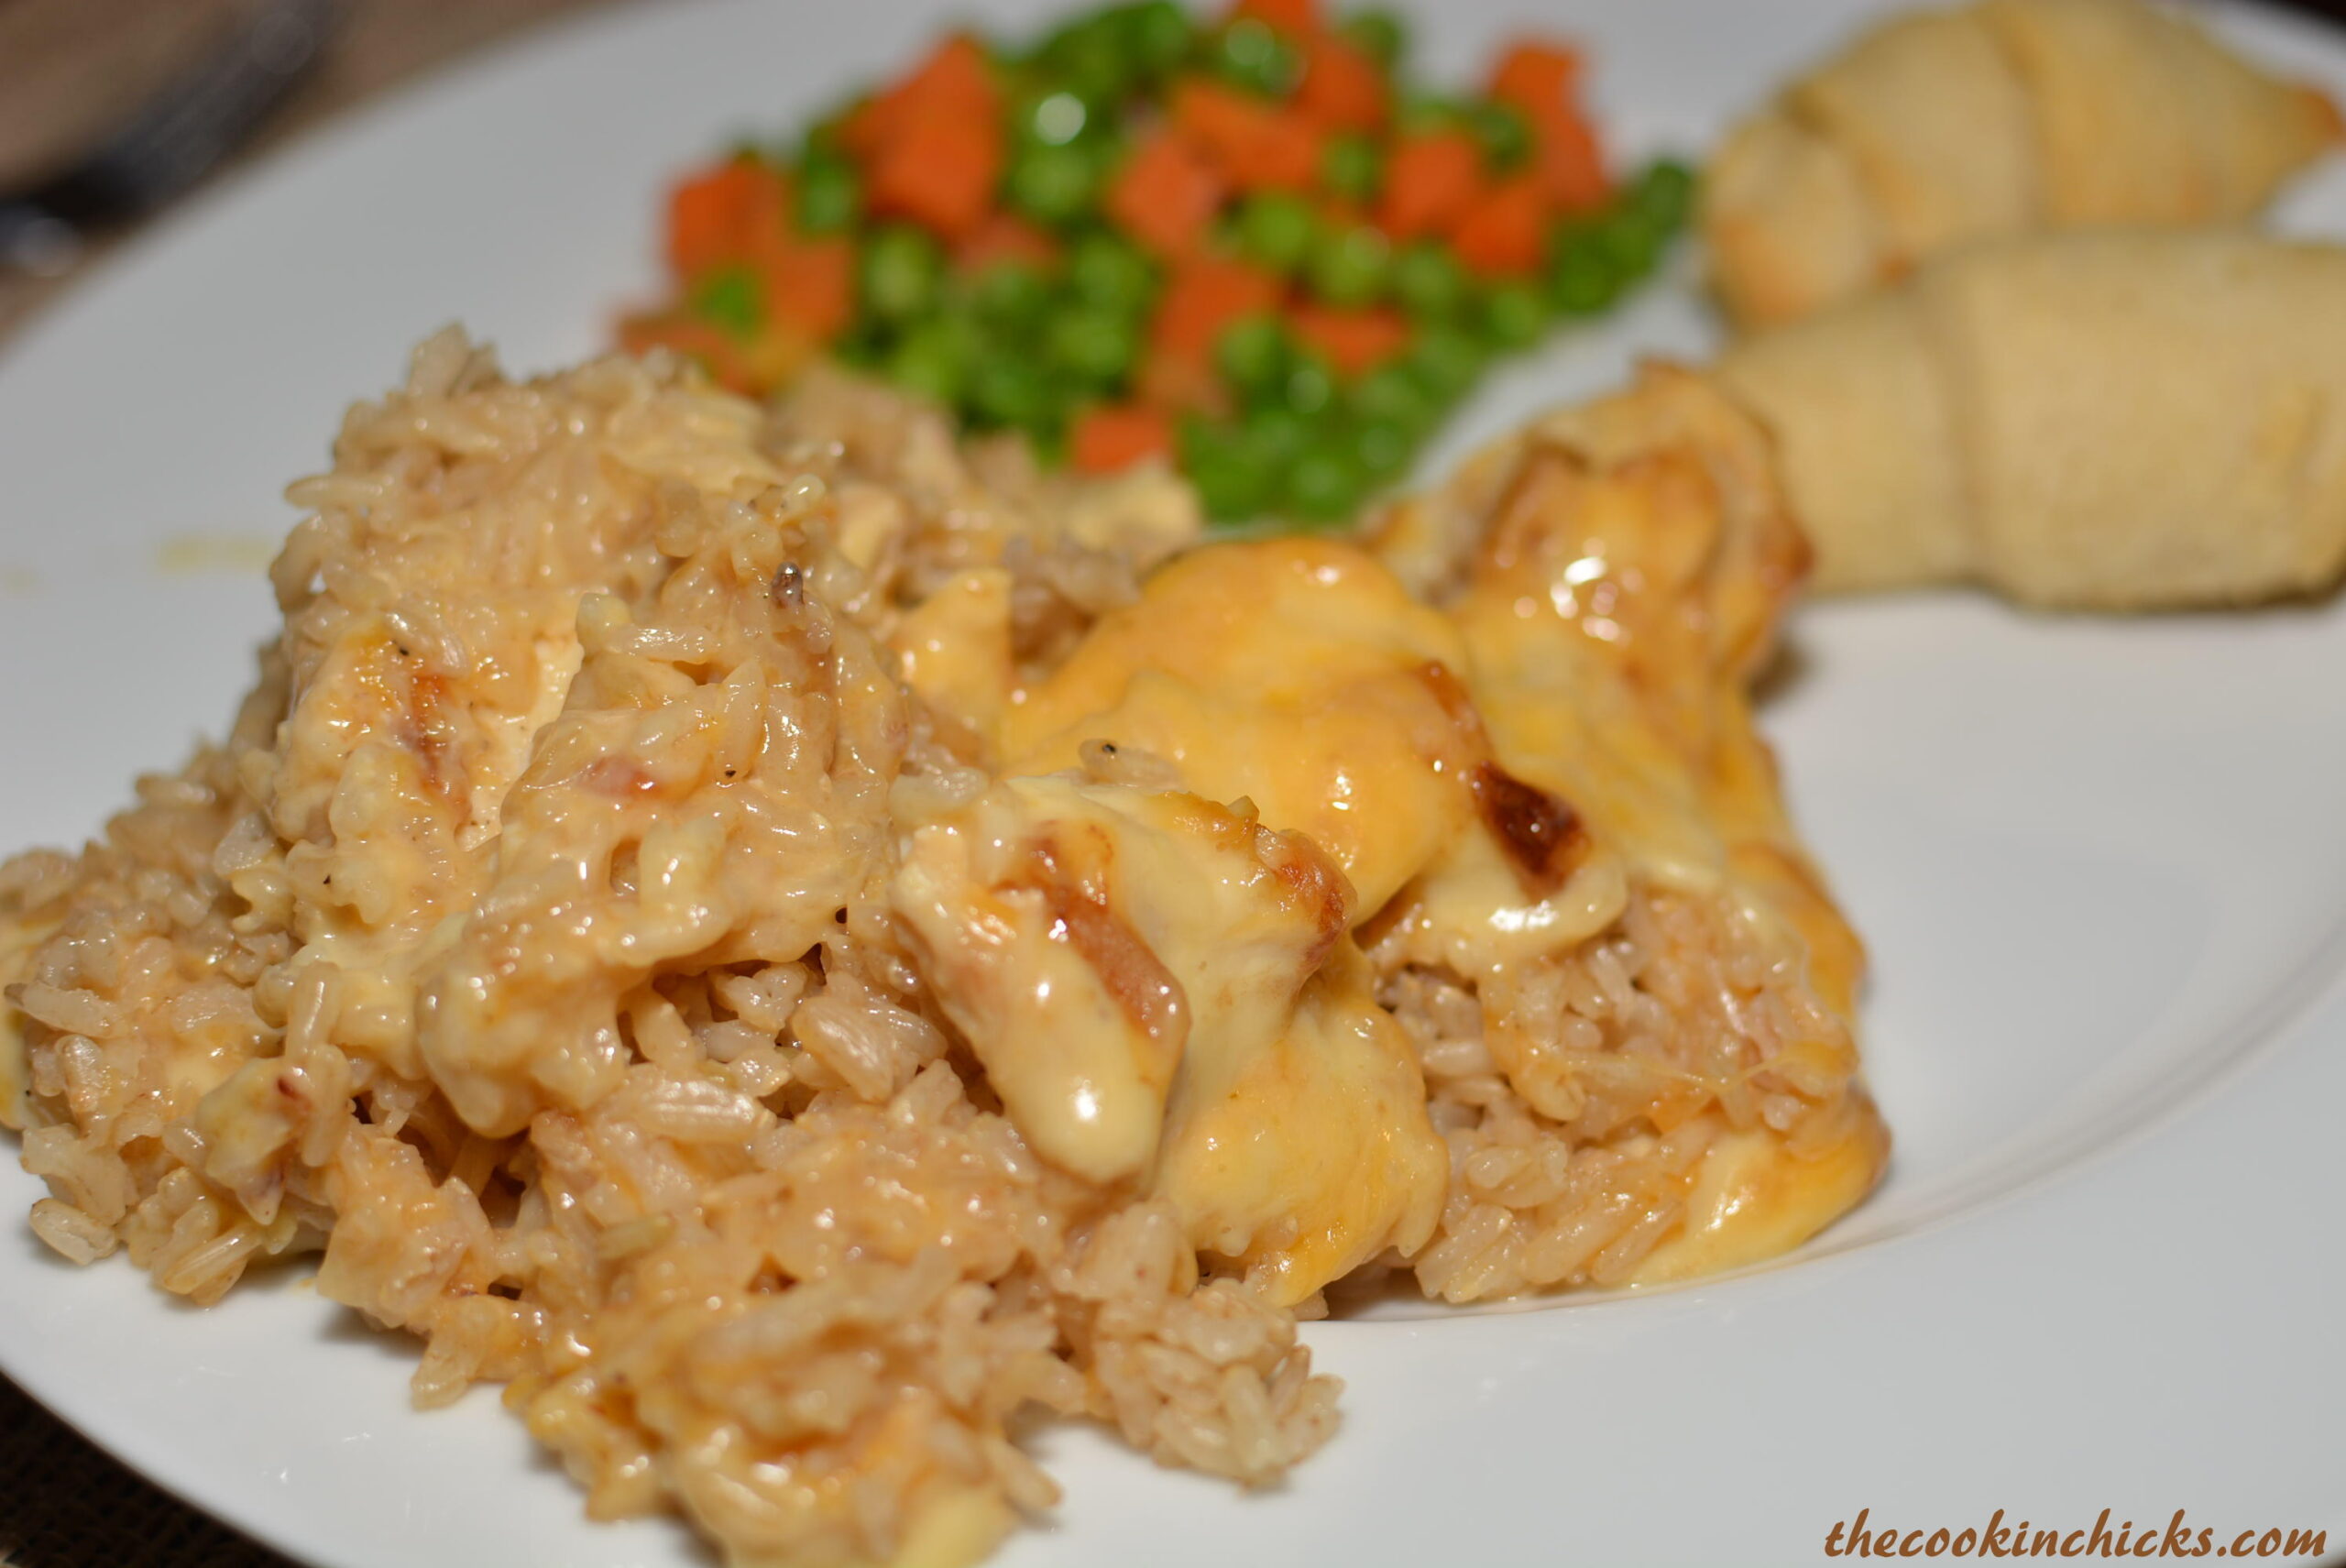 rice and chicken combined with cheese in a casserole